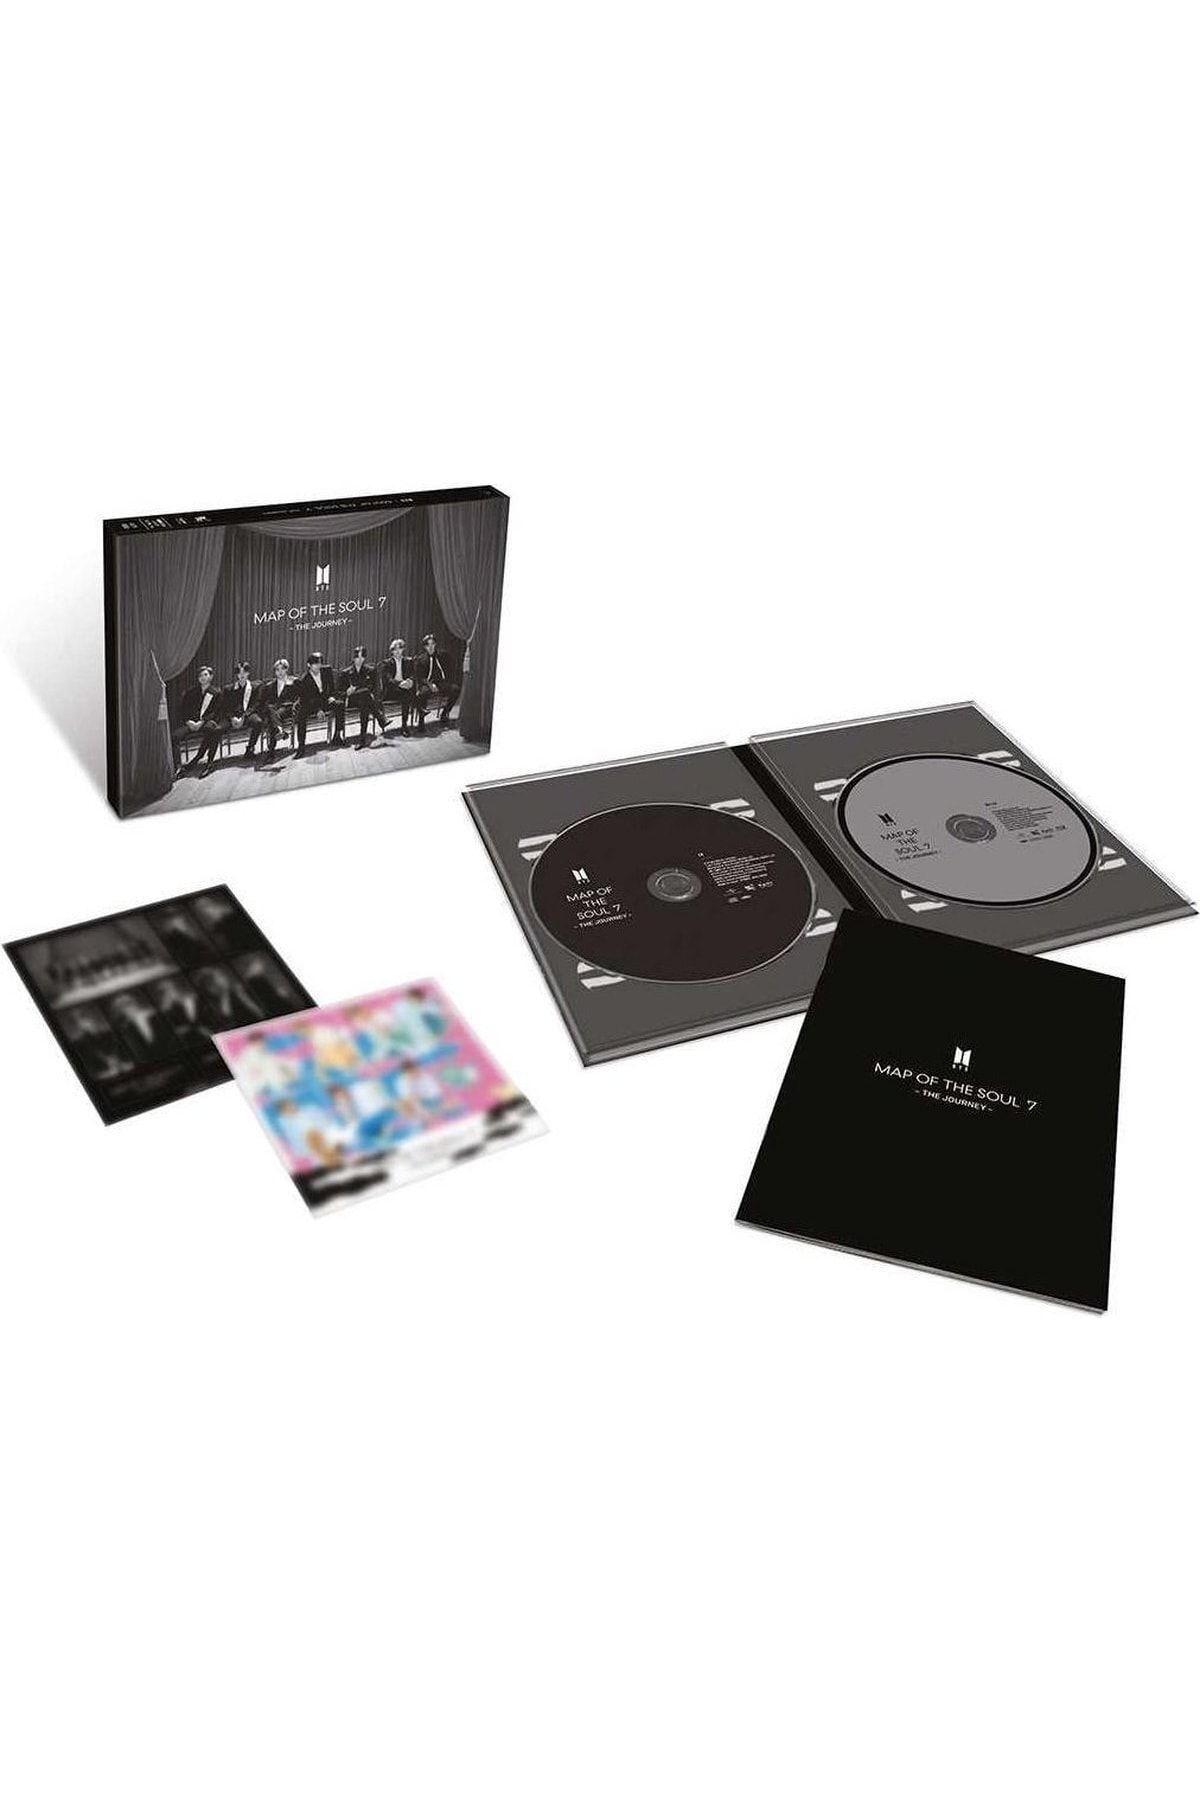 Universal -bts - Map Of The Soul : 7 , The Journey , (LIMITED A) (CD BLU-RAY 32 PAGE BOOKLET) - 2cd